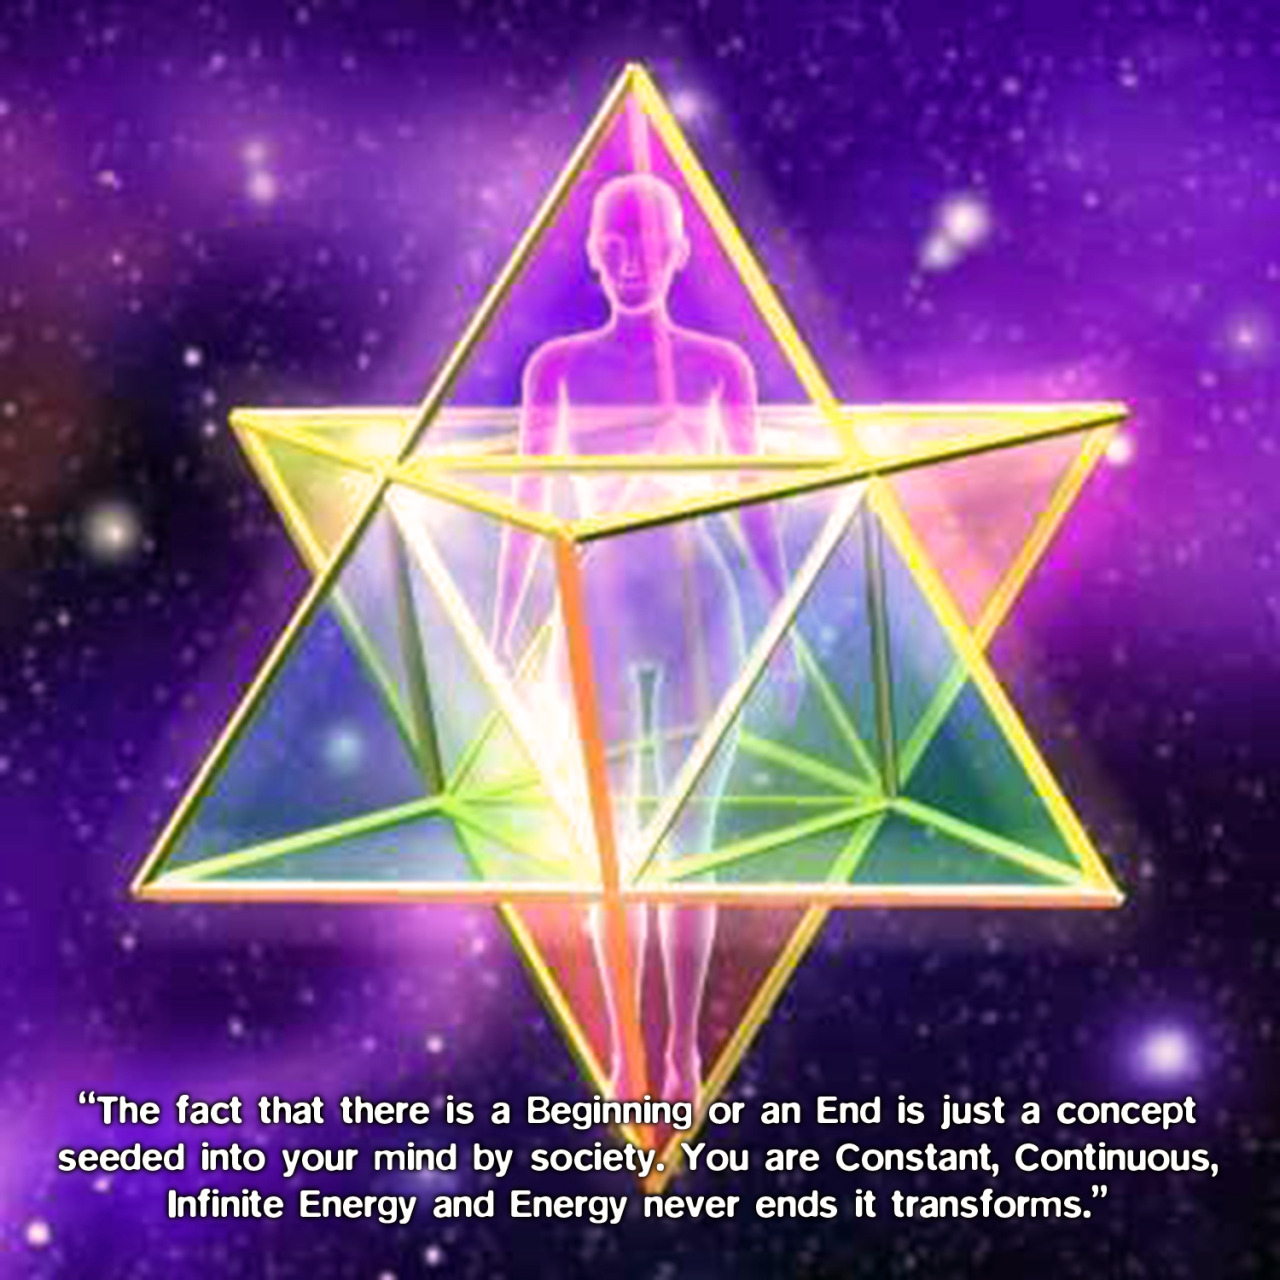 merkaba energy - "The fact that there is a Beginning or an End is just a concept seeded into your mind by society. You are constant, Continuous, Infinite Energy and Energy never ends it transforms."